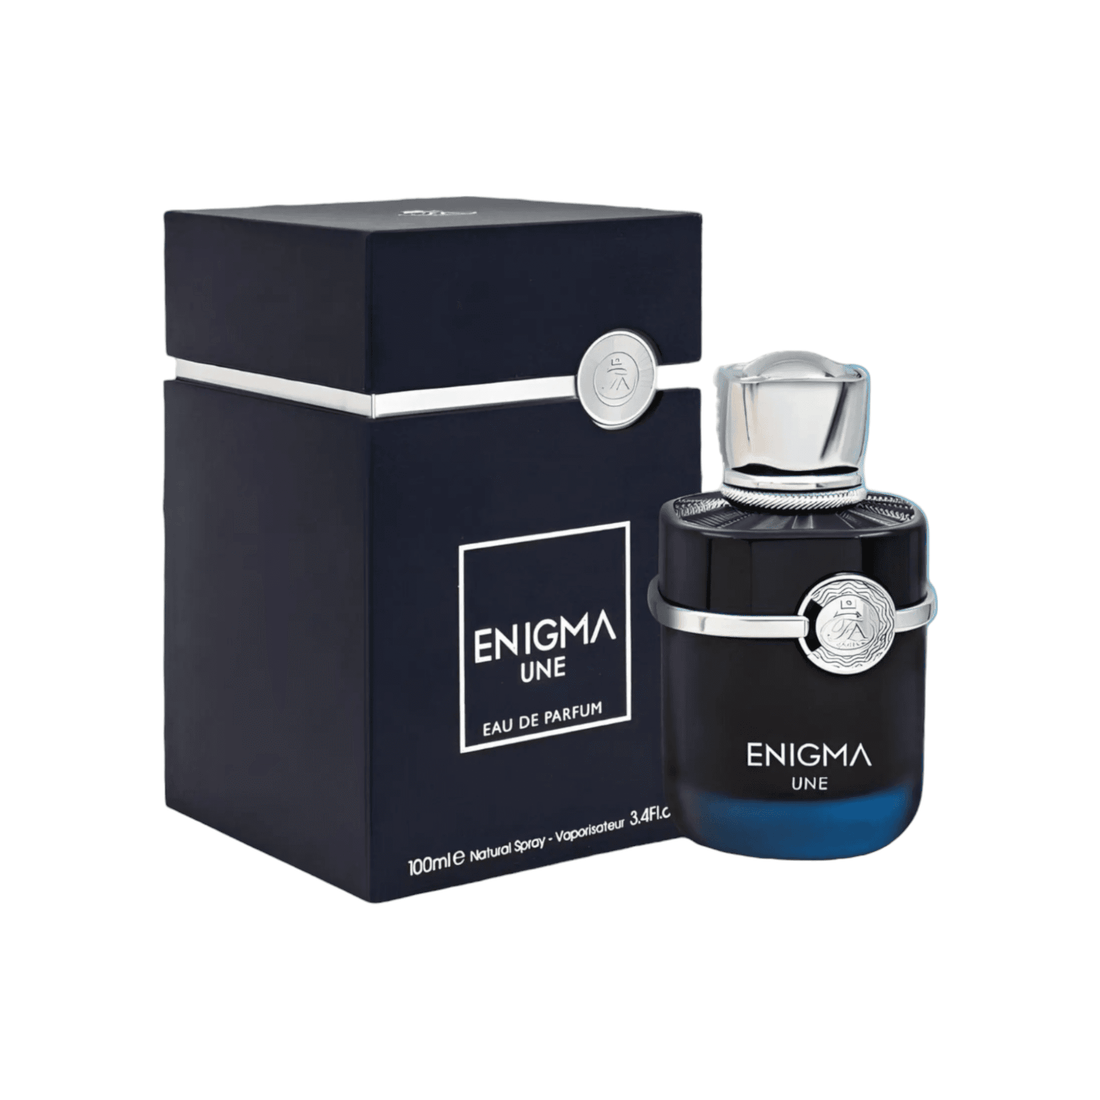 Enigma Une 100ml Perfume by FA Paris, showcasing its unique blend of spicy, floral, and woody notes.